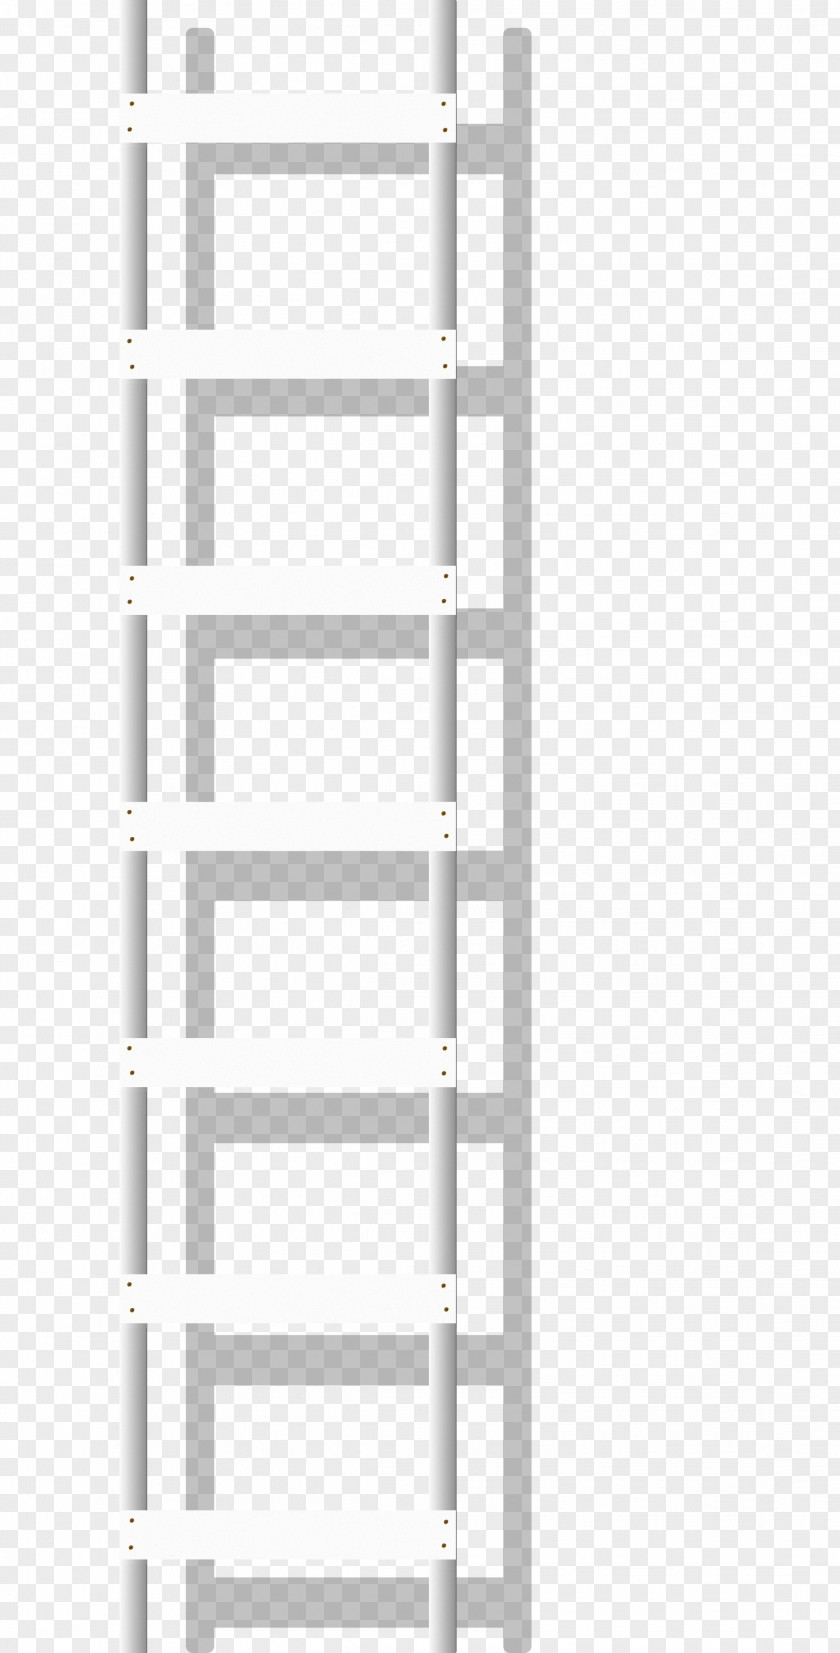 Ladder Stairs Computer File PNG